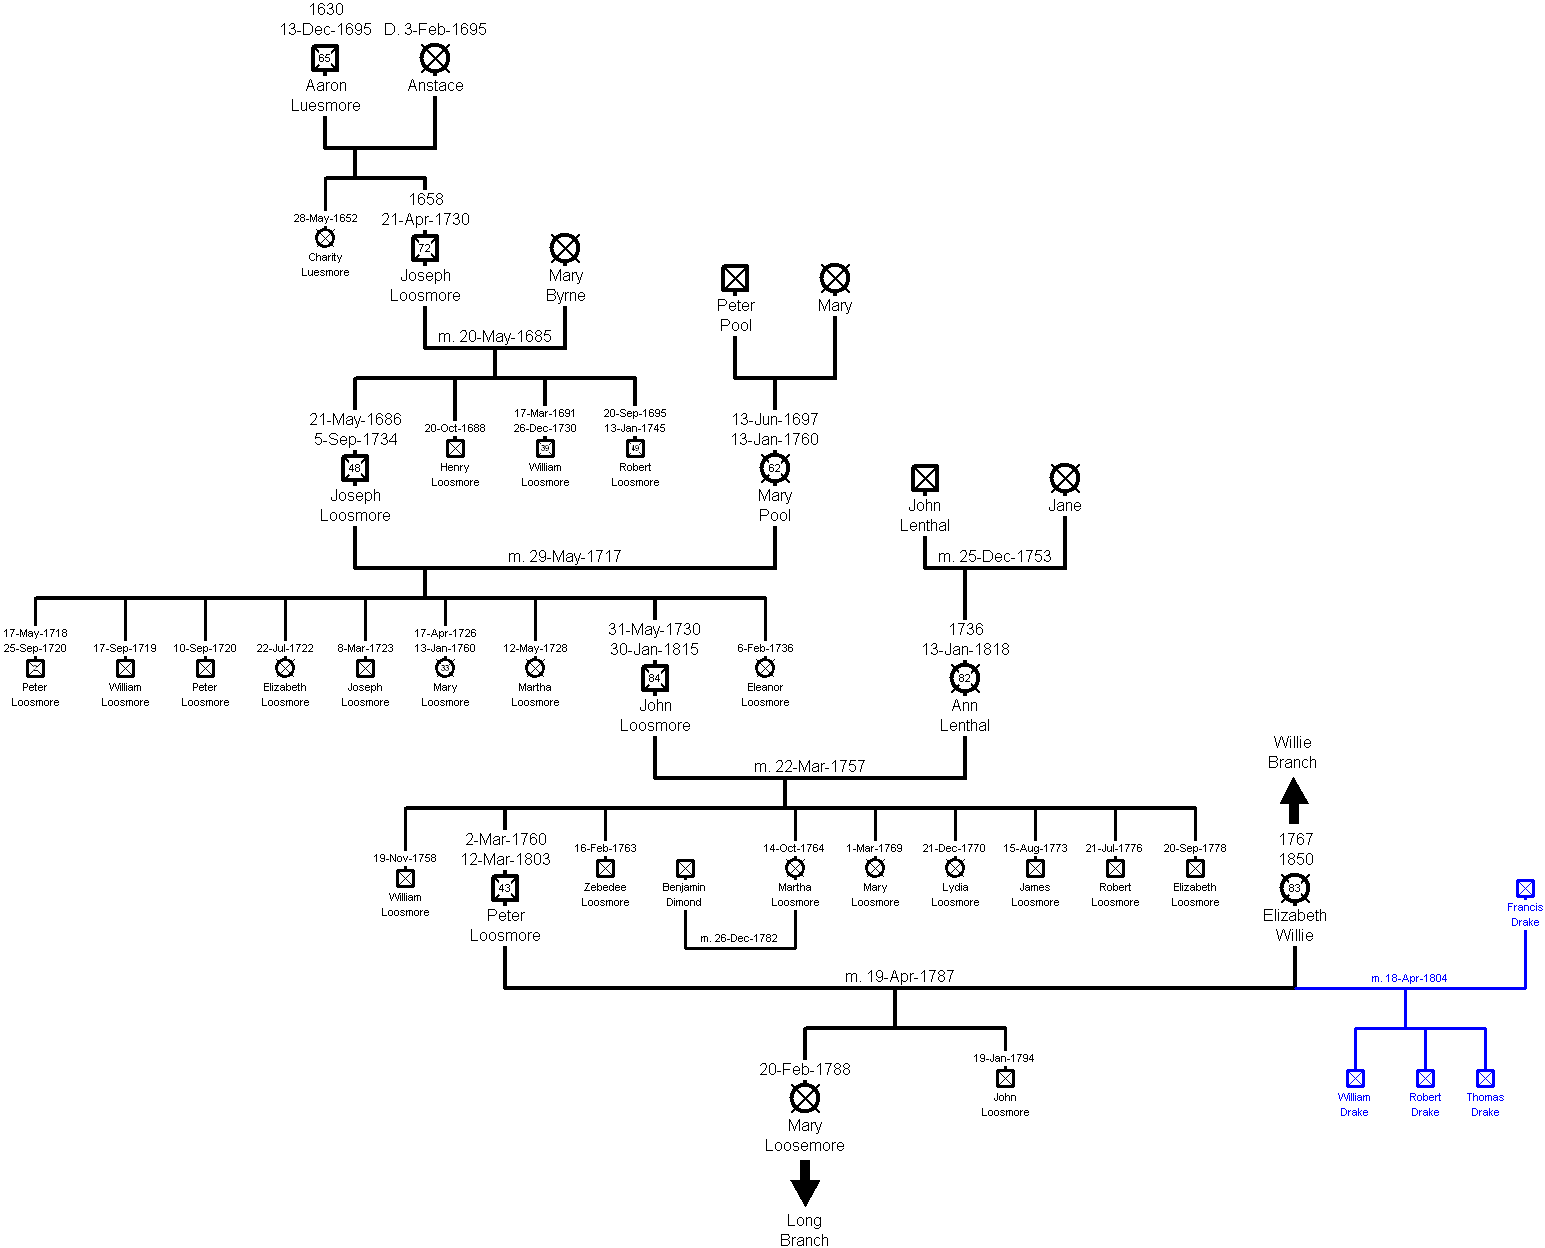 Family Tree of the Loosemore Branch